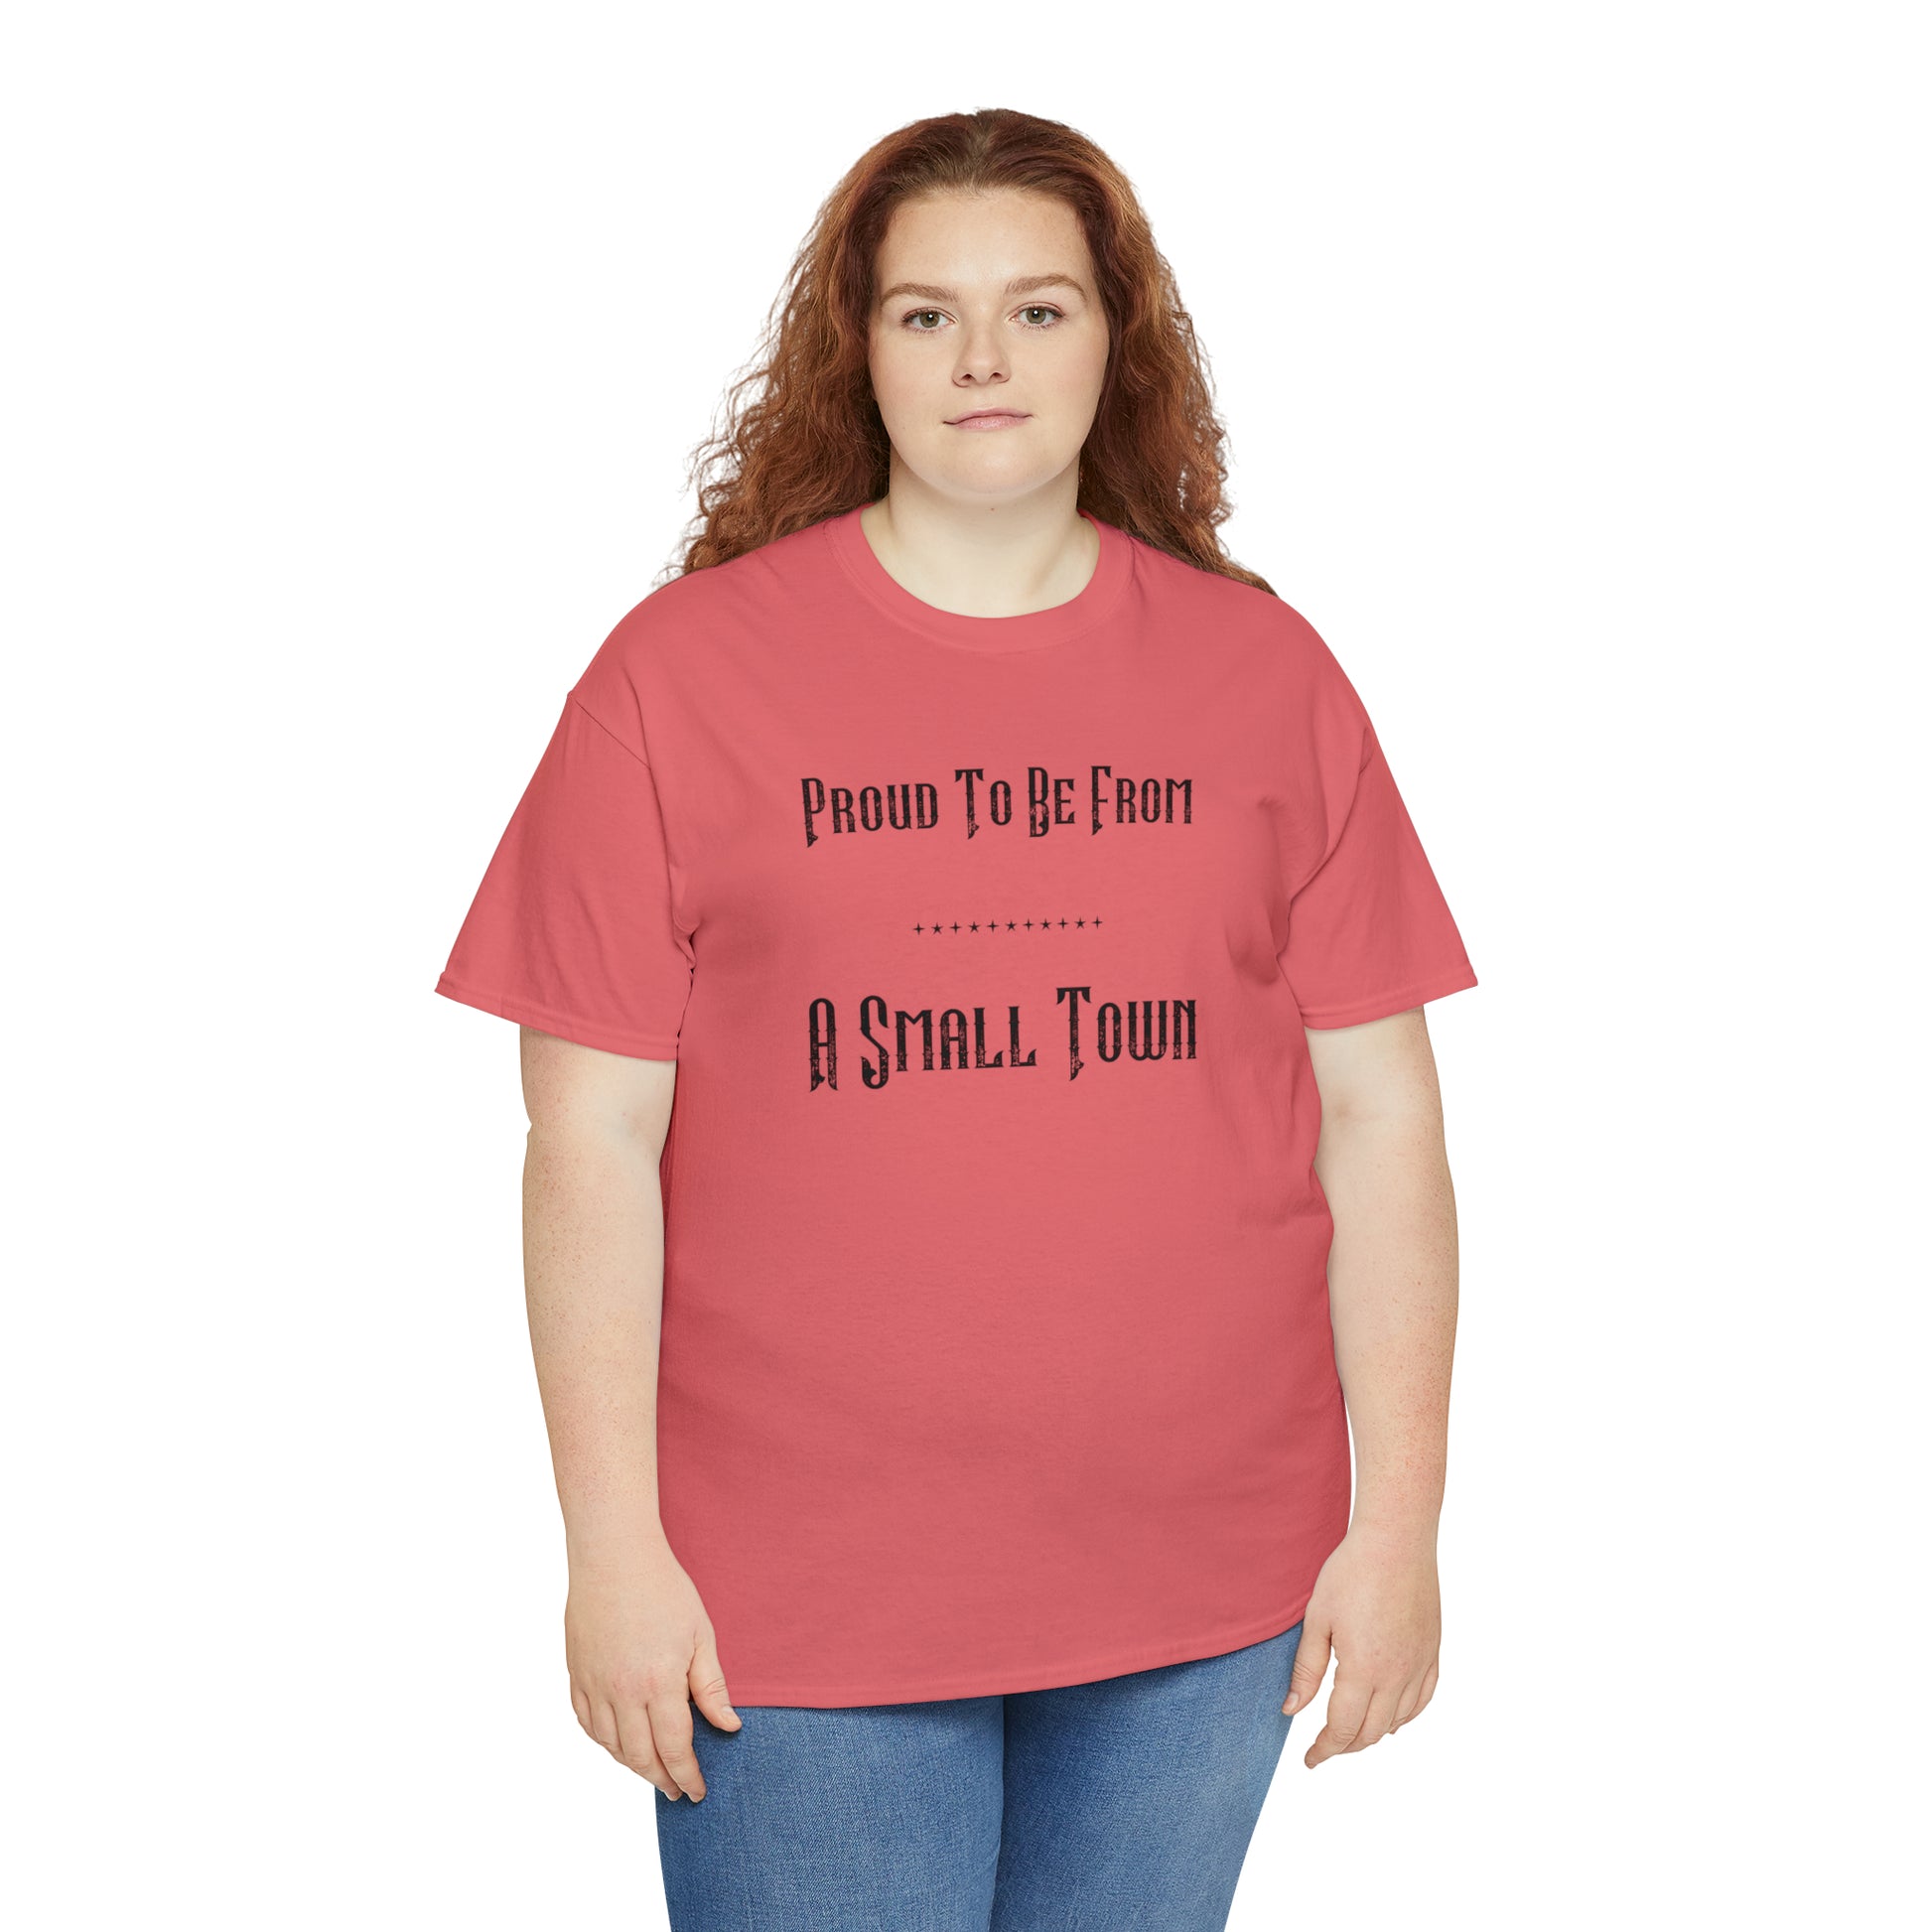 "Proud To Be From A Small Town" T-Shirt - Weave Got Gifts - Unique Gifts You Won’t Find Anywhere Else!